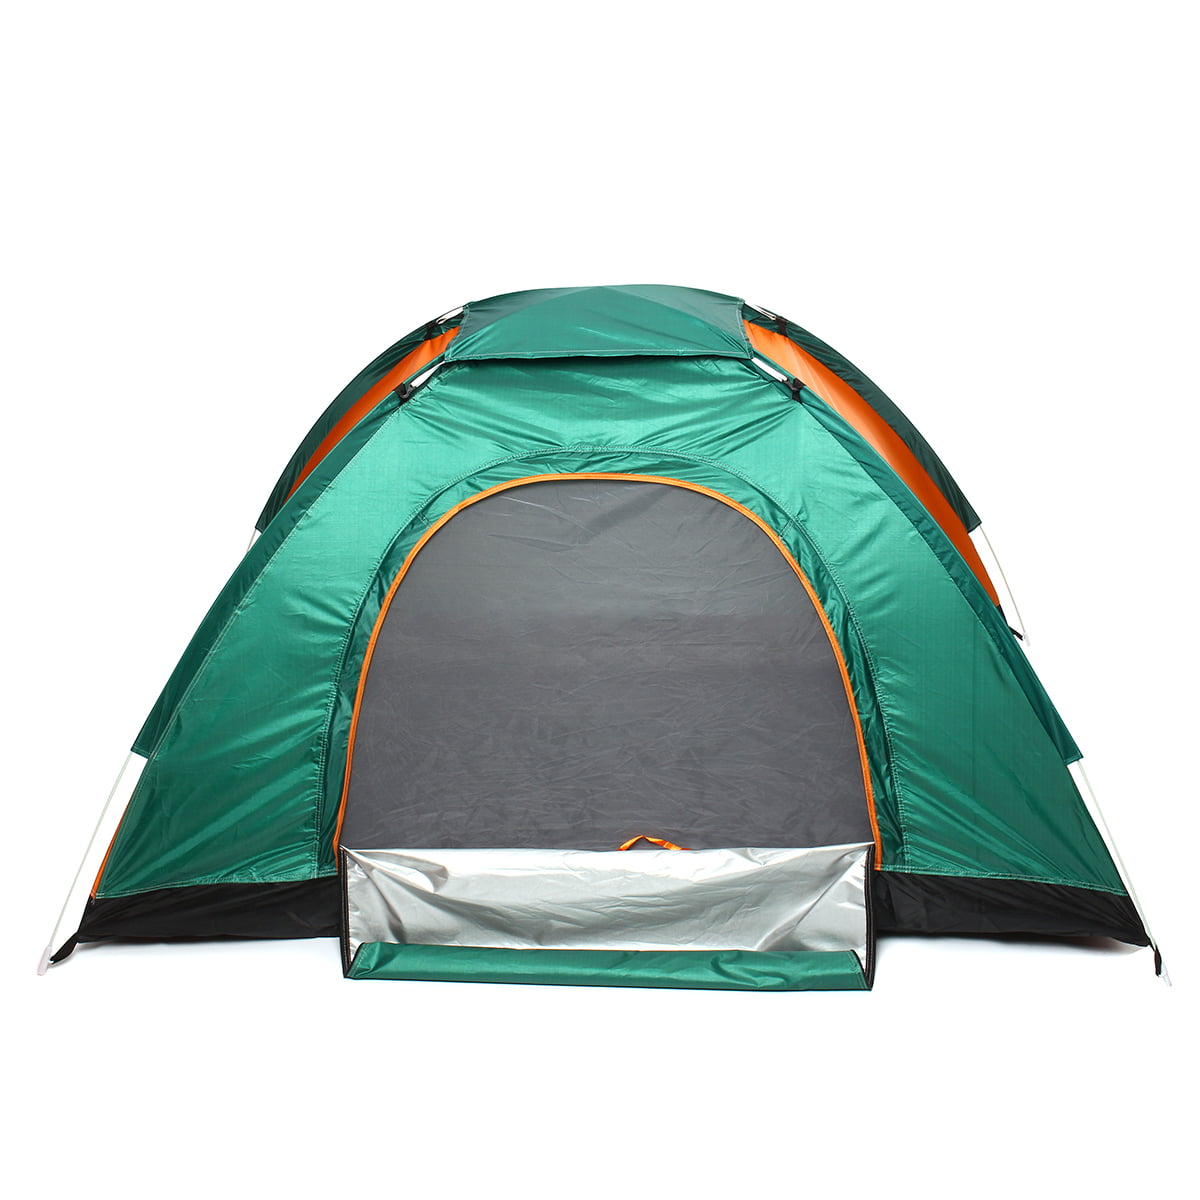 2-3 Man Person Tent Family Festival Camping Hiking Beach Outdoor Dome Tent U 